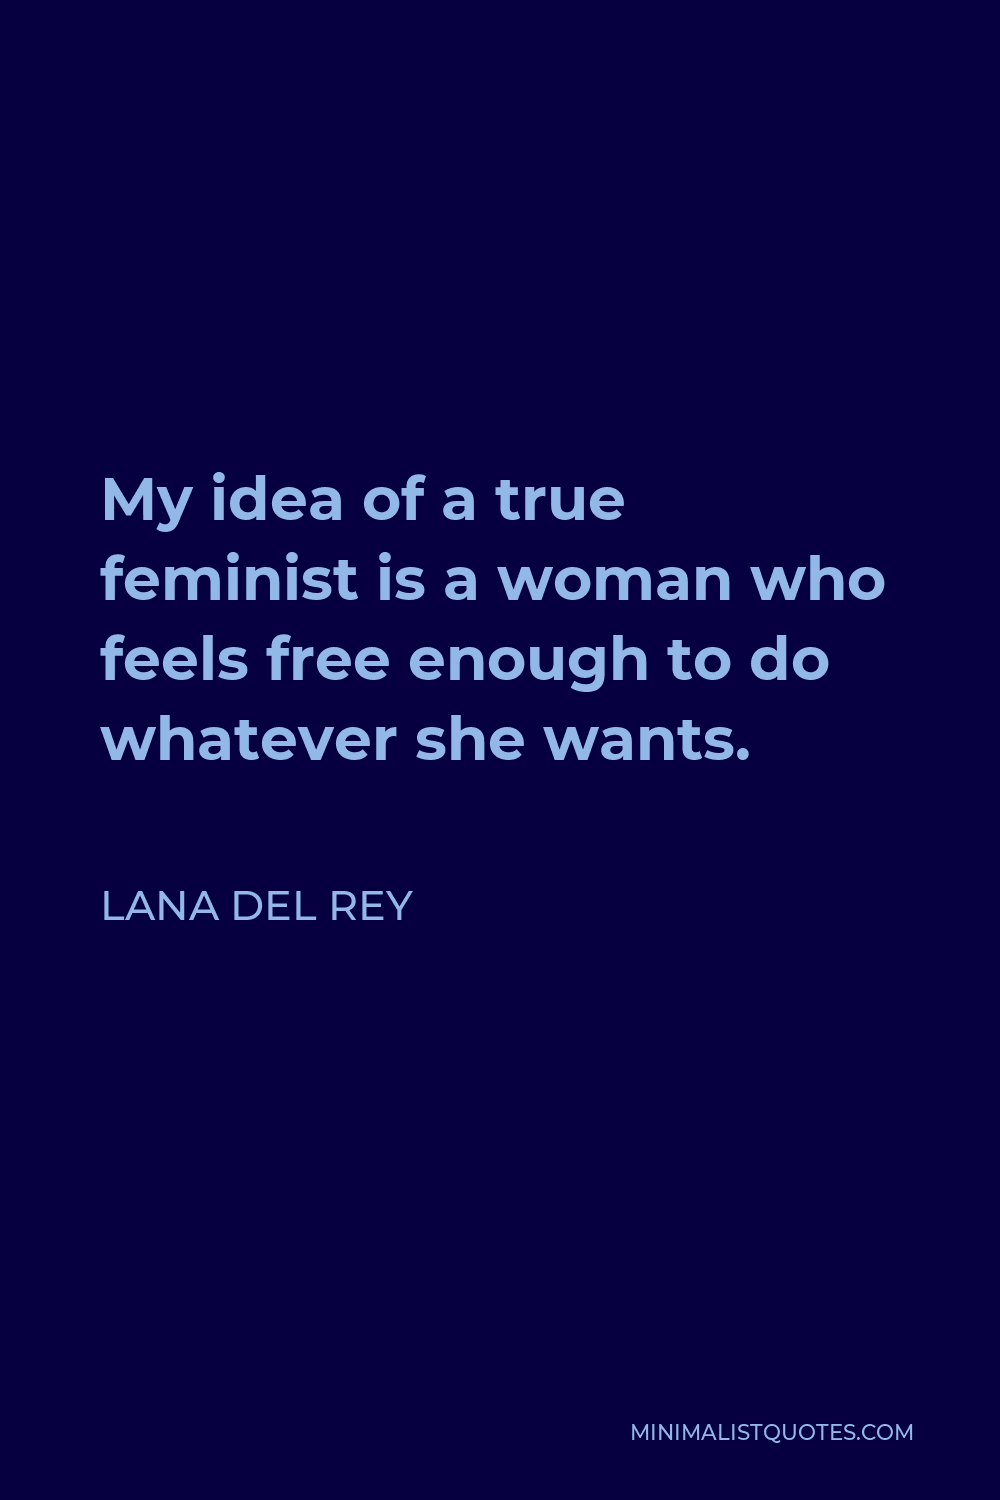 Lana Del Rey Quote - My idea of a true feminist is a woman who feels free enough to do whatever she wants.